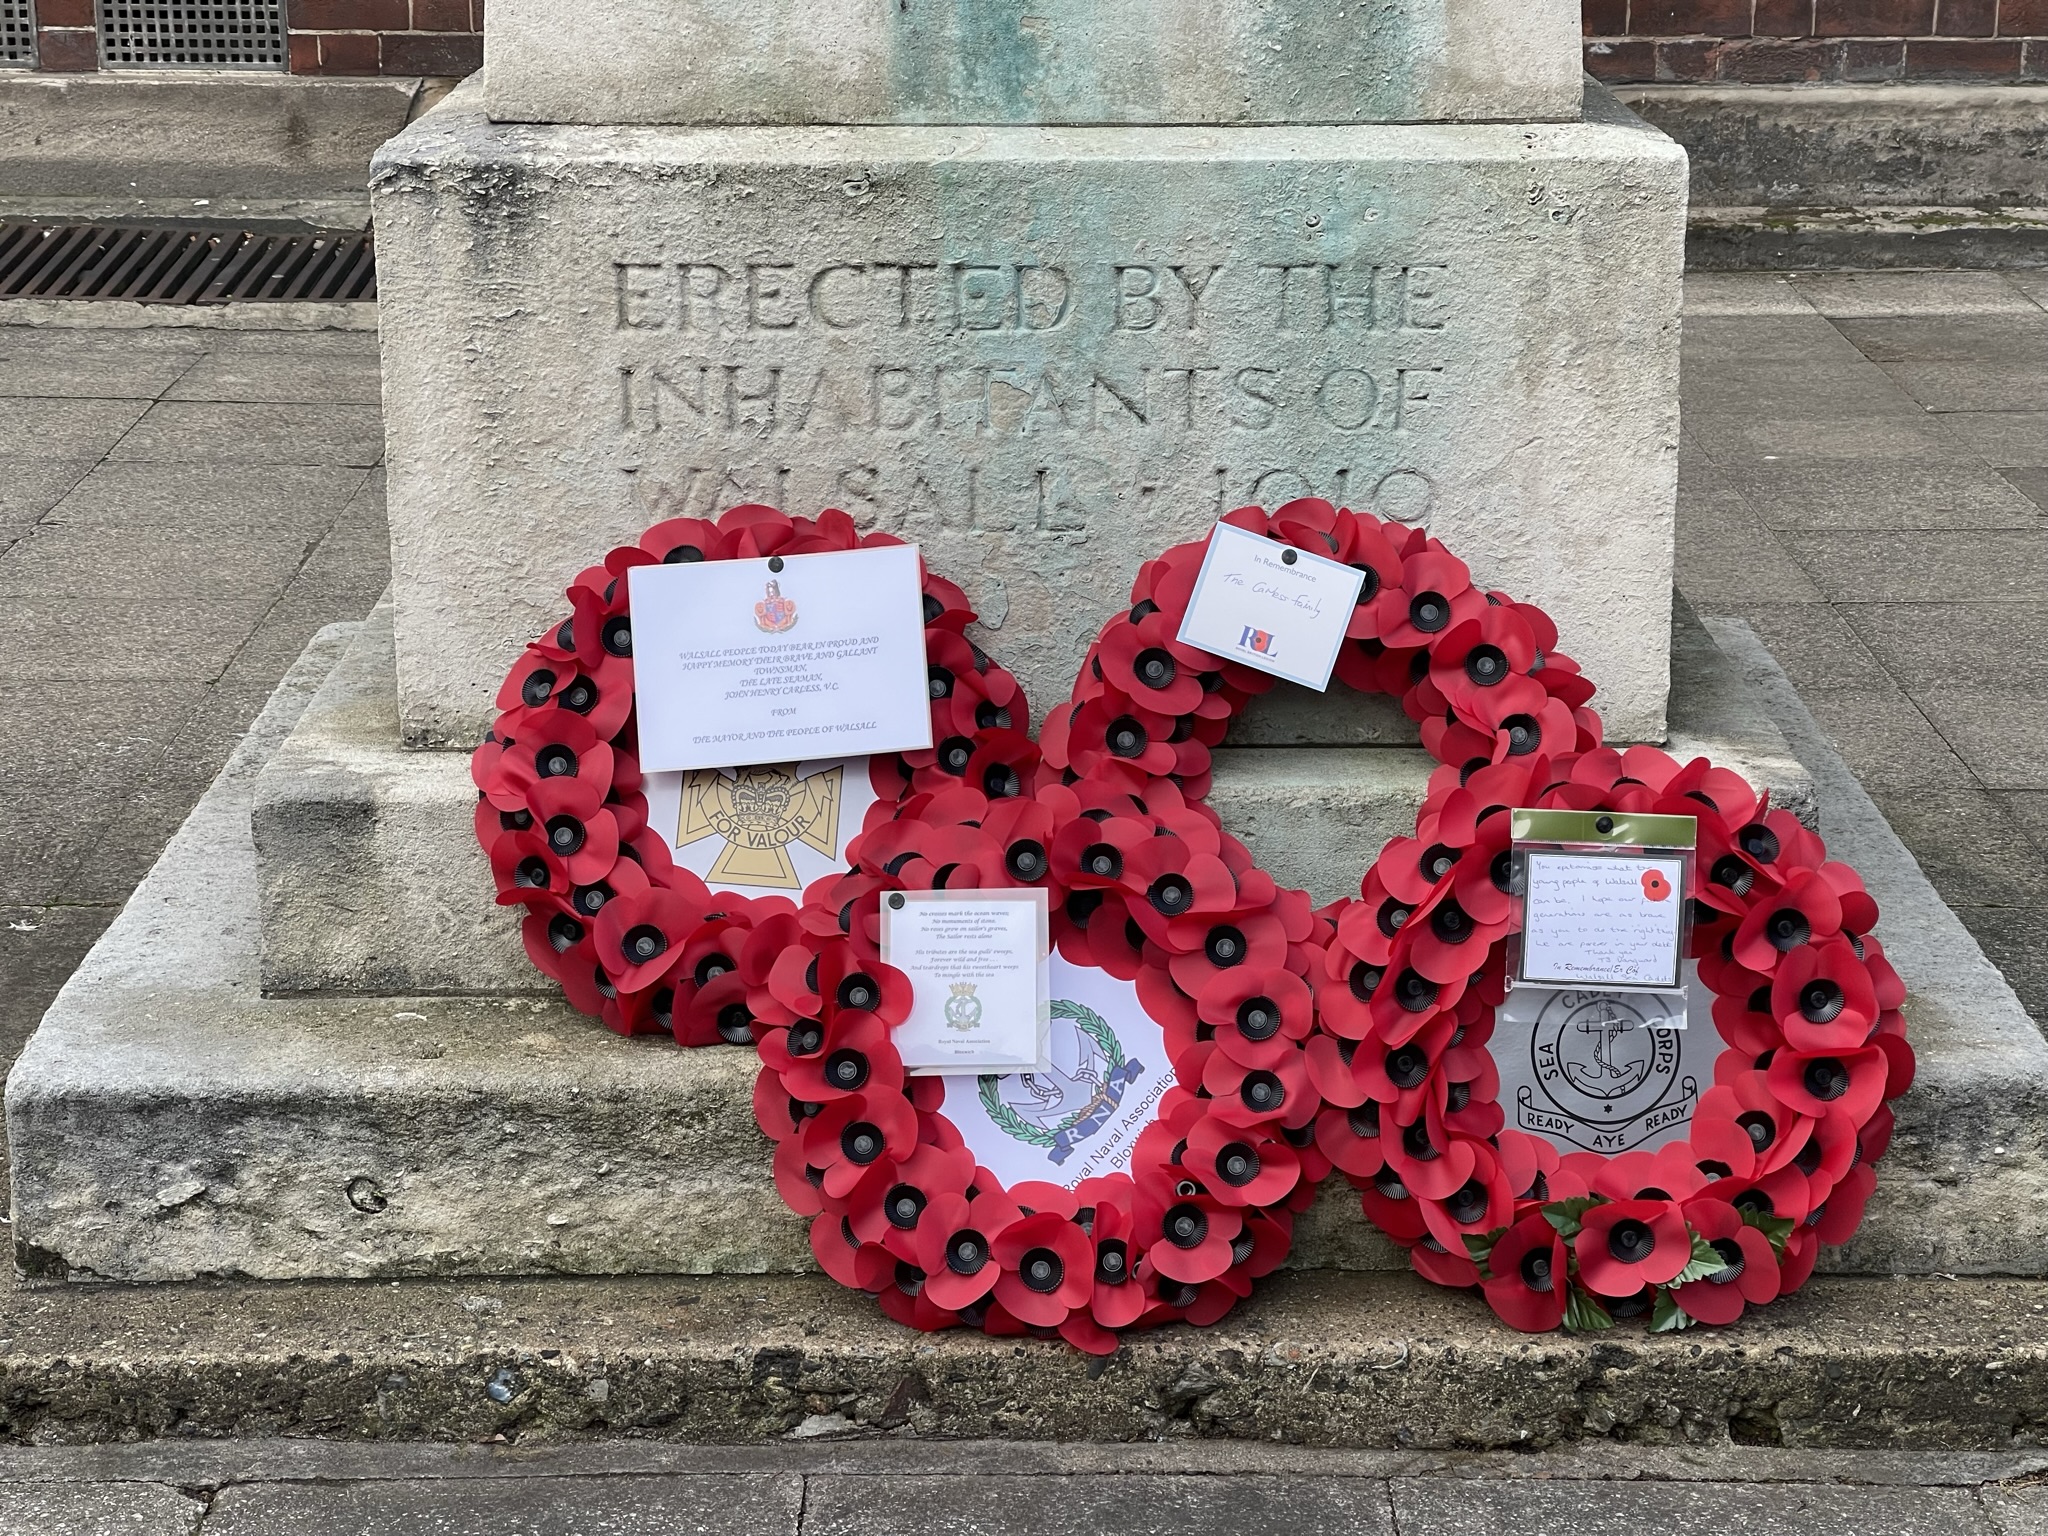 Poppy wreaths at the Carless memorial